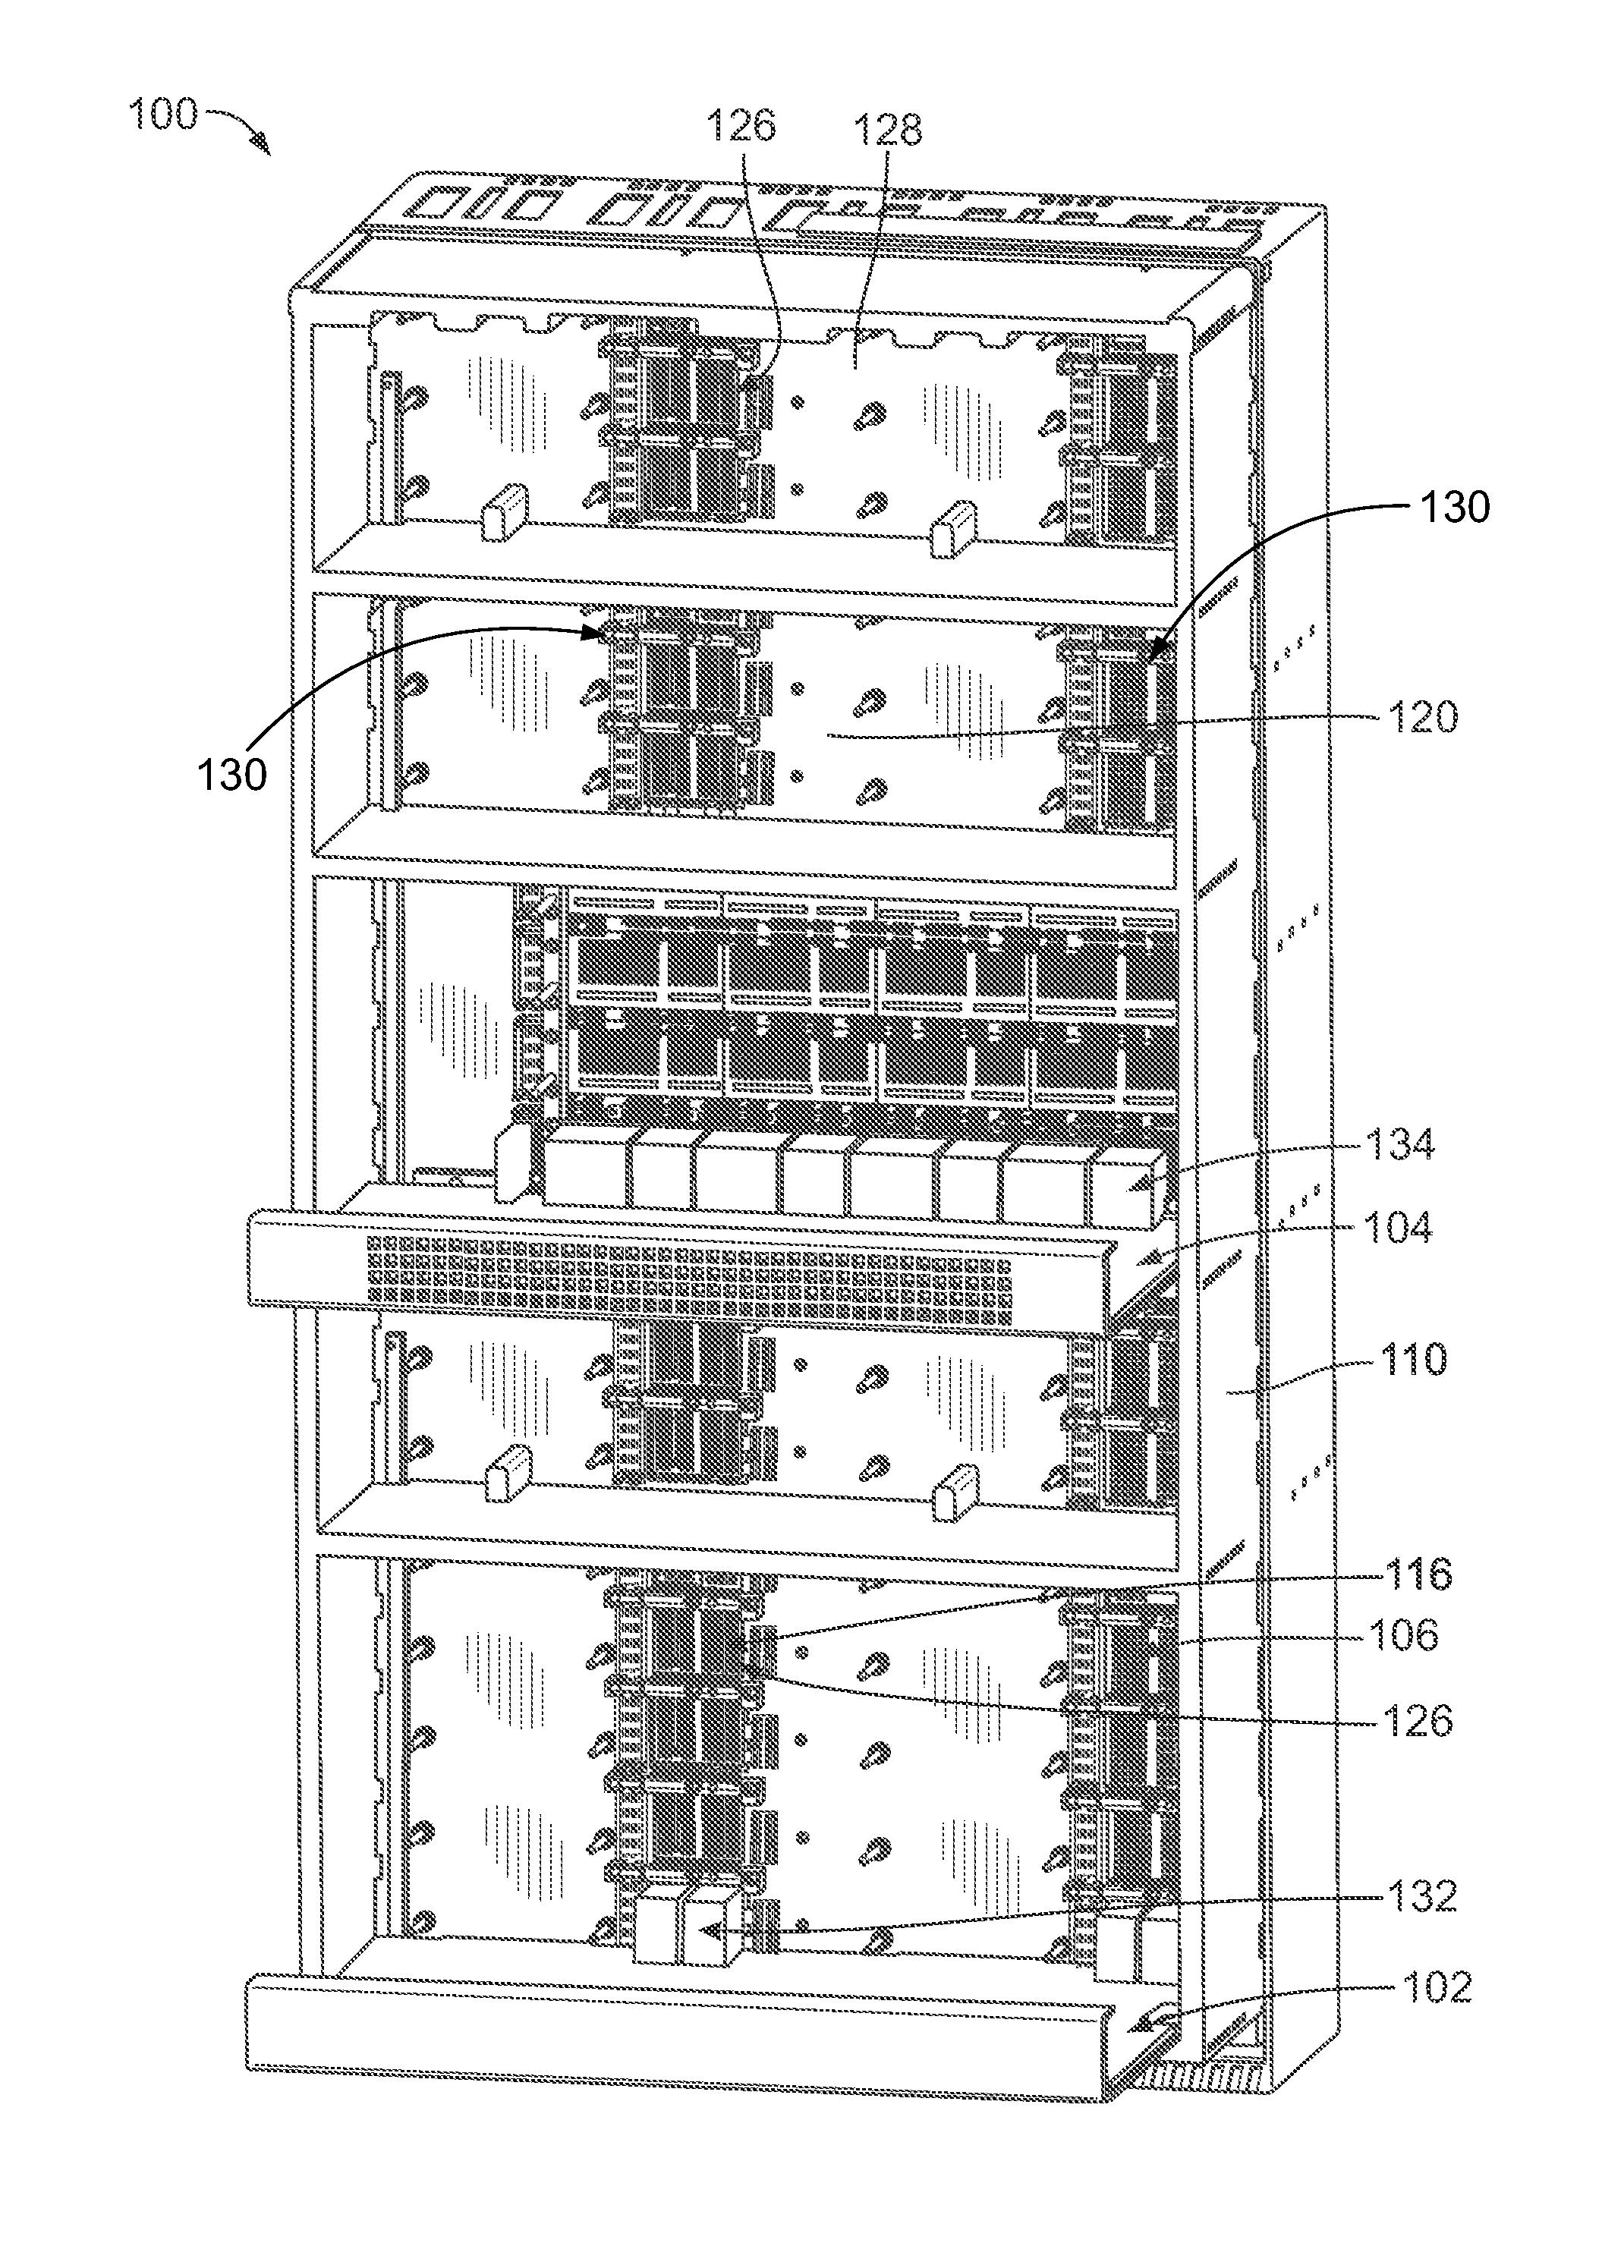 Cable backplane system having stiffeners